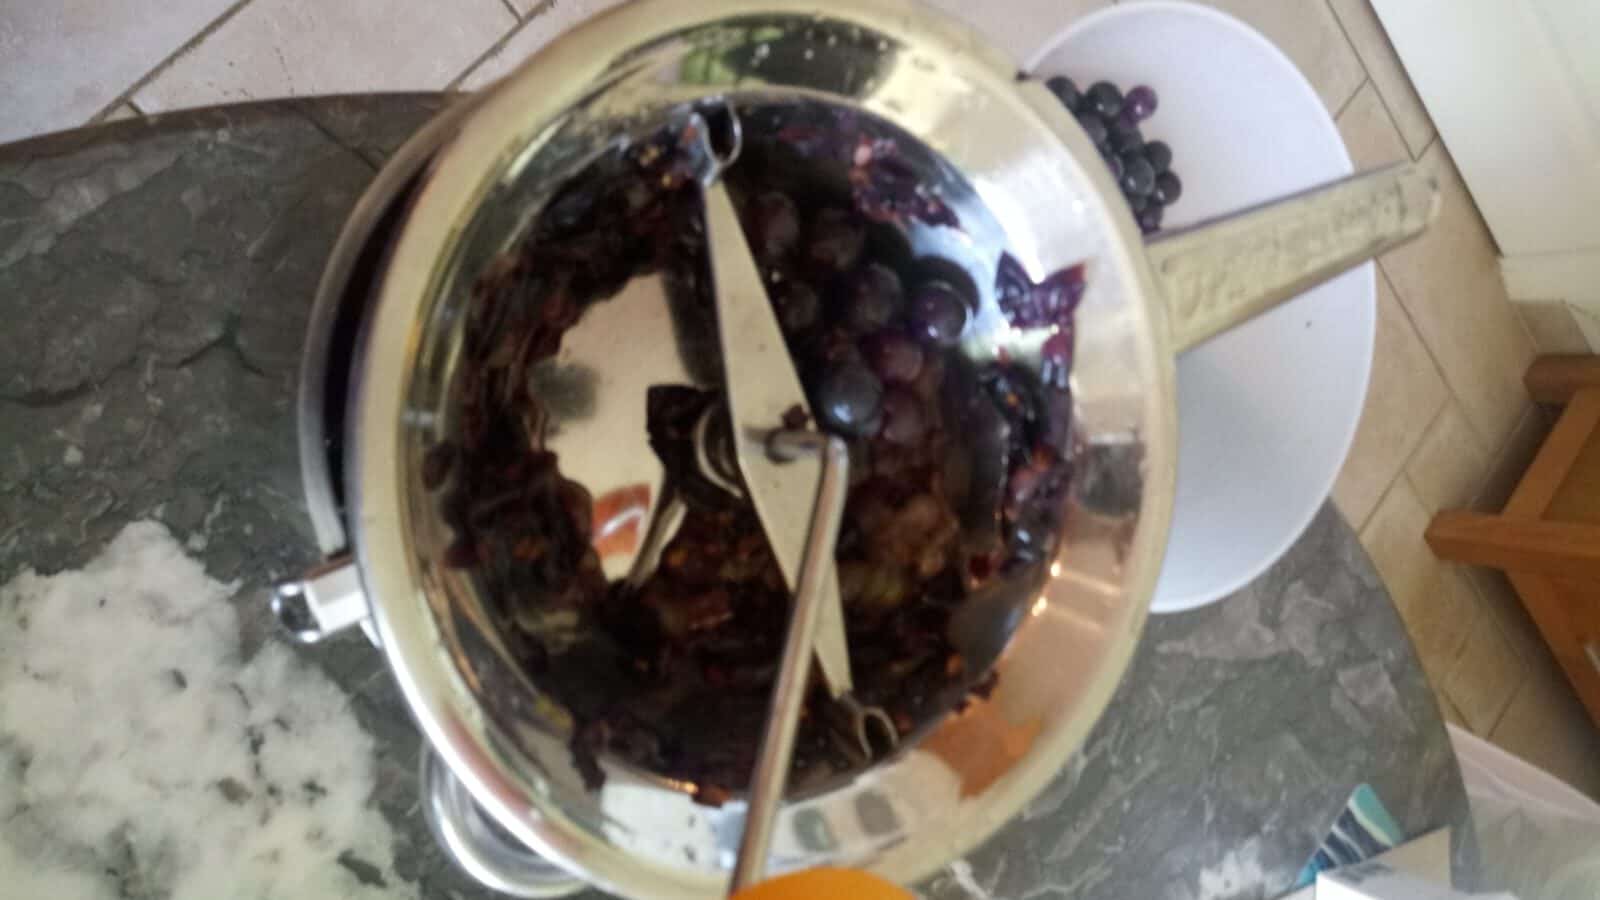 Pass the grapes through an electrical vegetable strainer